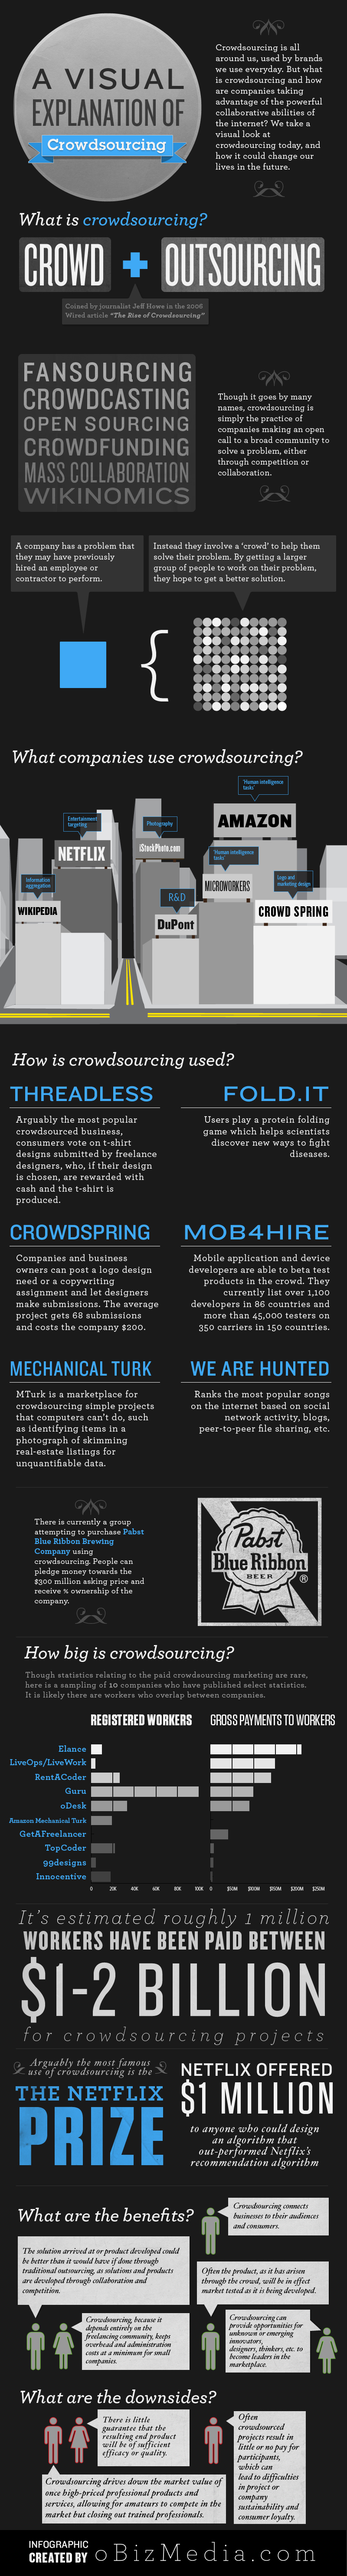 Crowdsourcing-Infographic